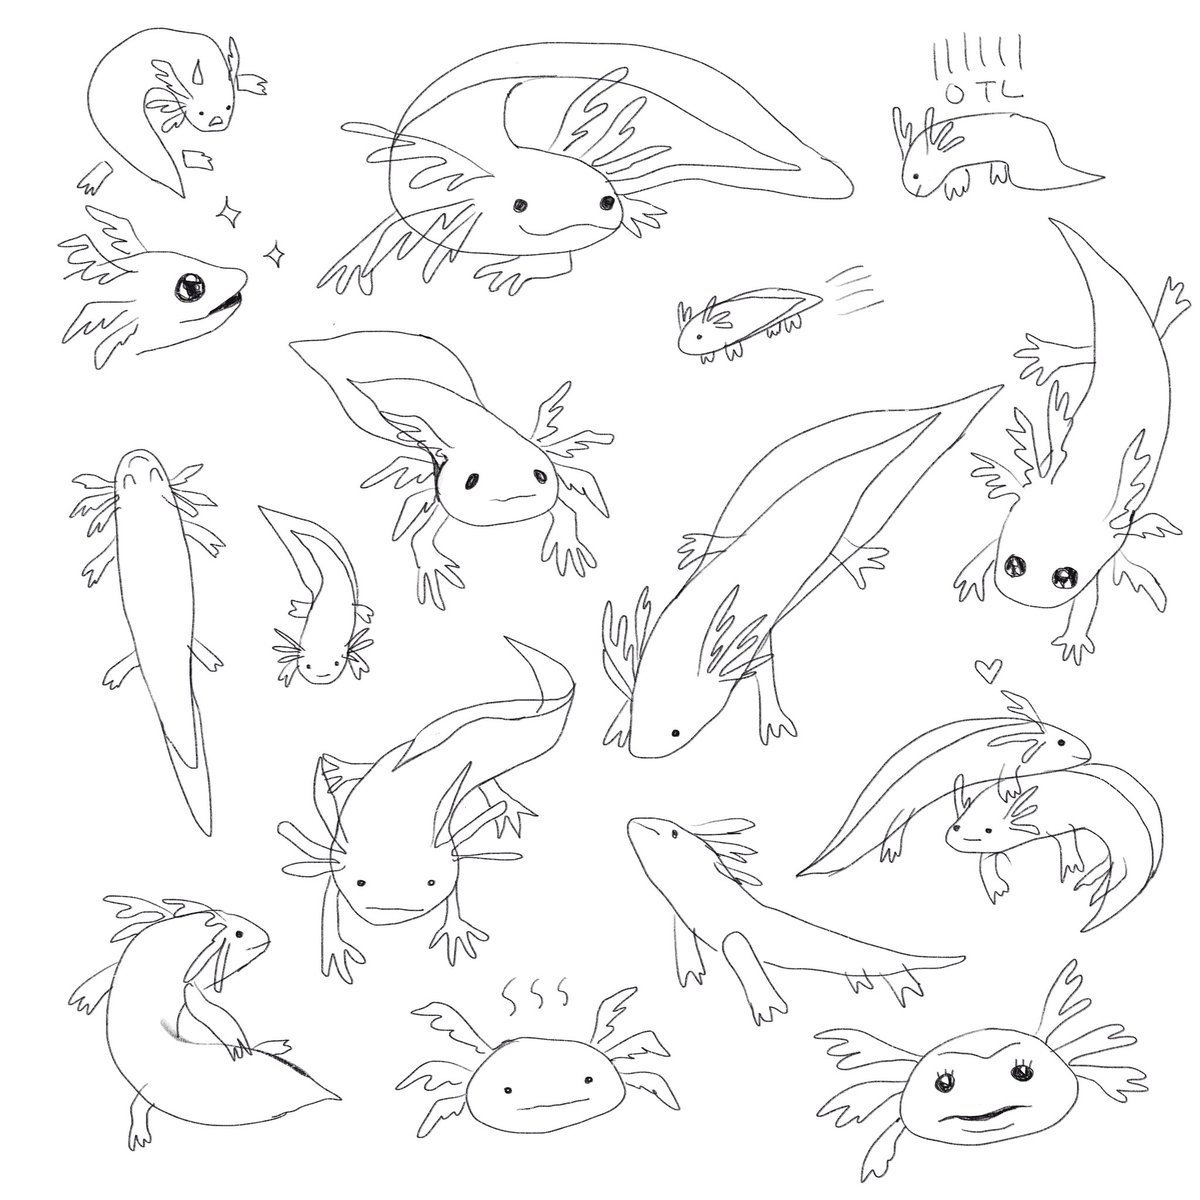 Oh I also doodled a bunch of axolotls 